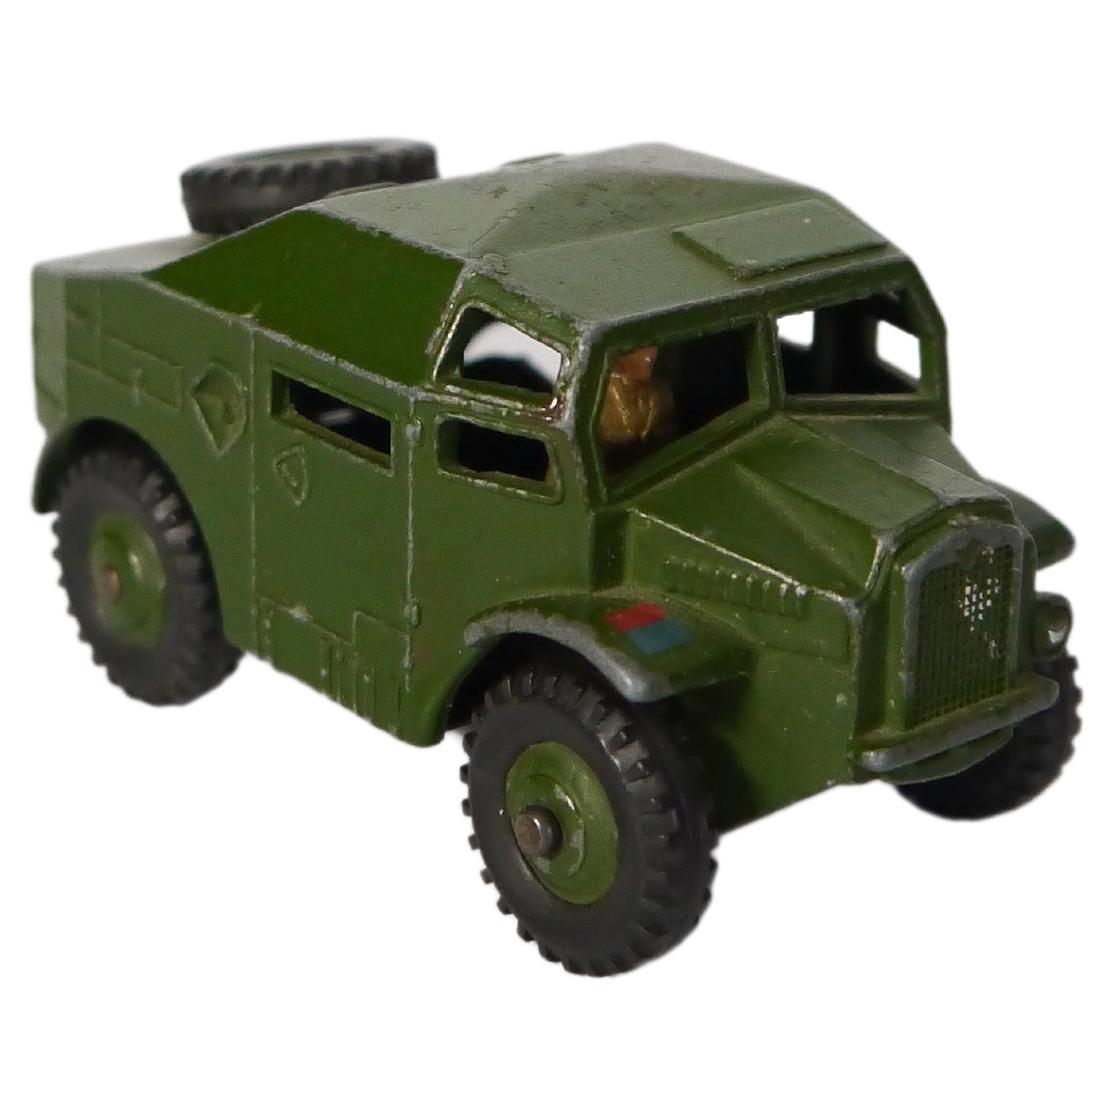 Dinky Toys "Field Artillery Tractor" by Meccano Ltd, England, 1967 For Sale